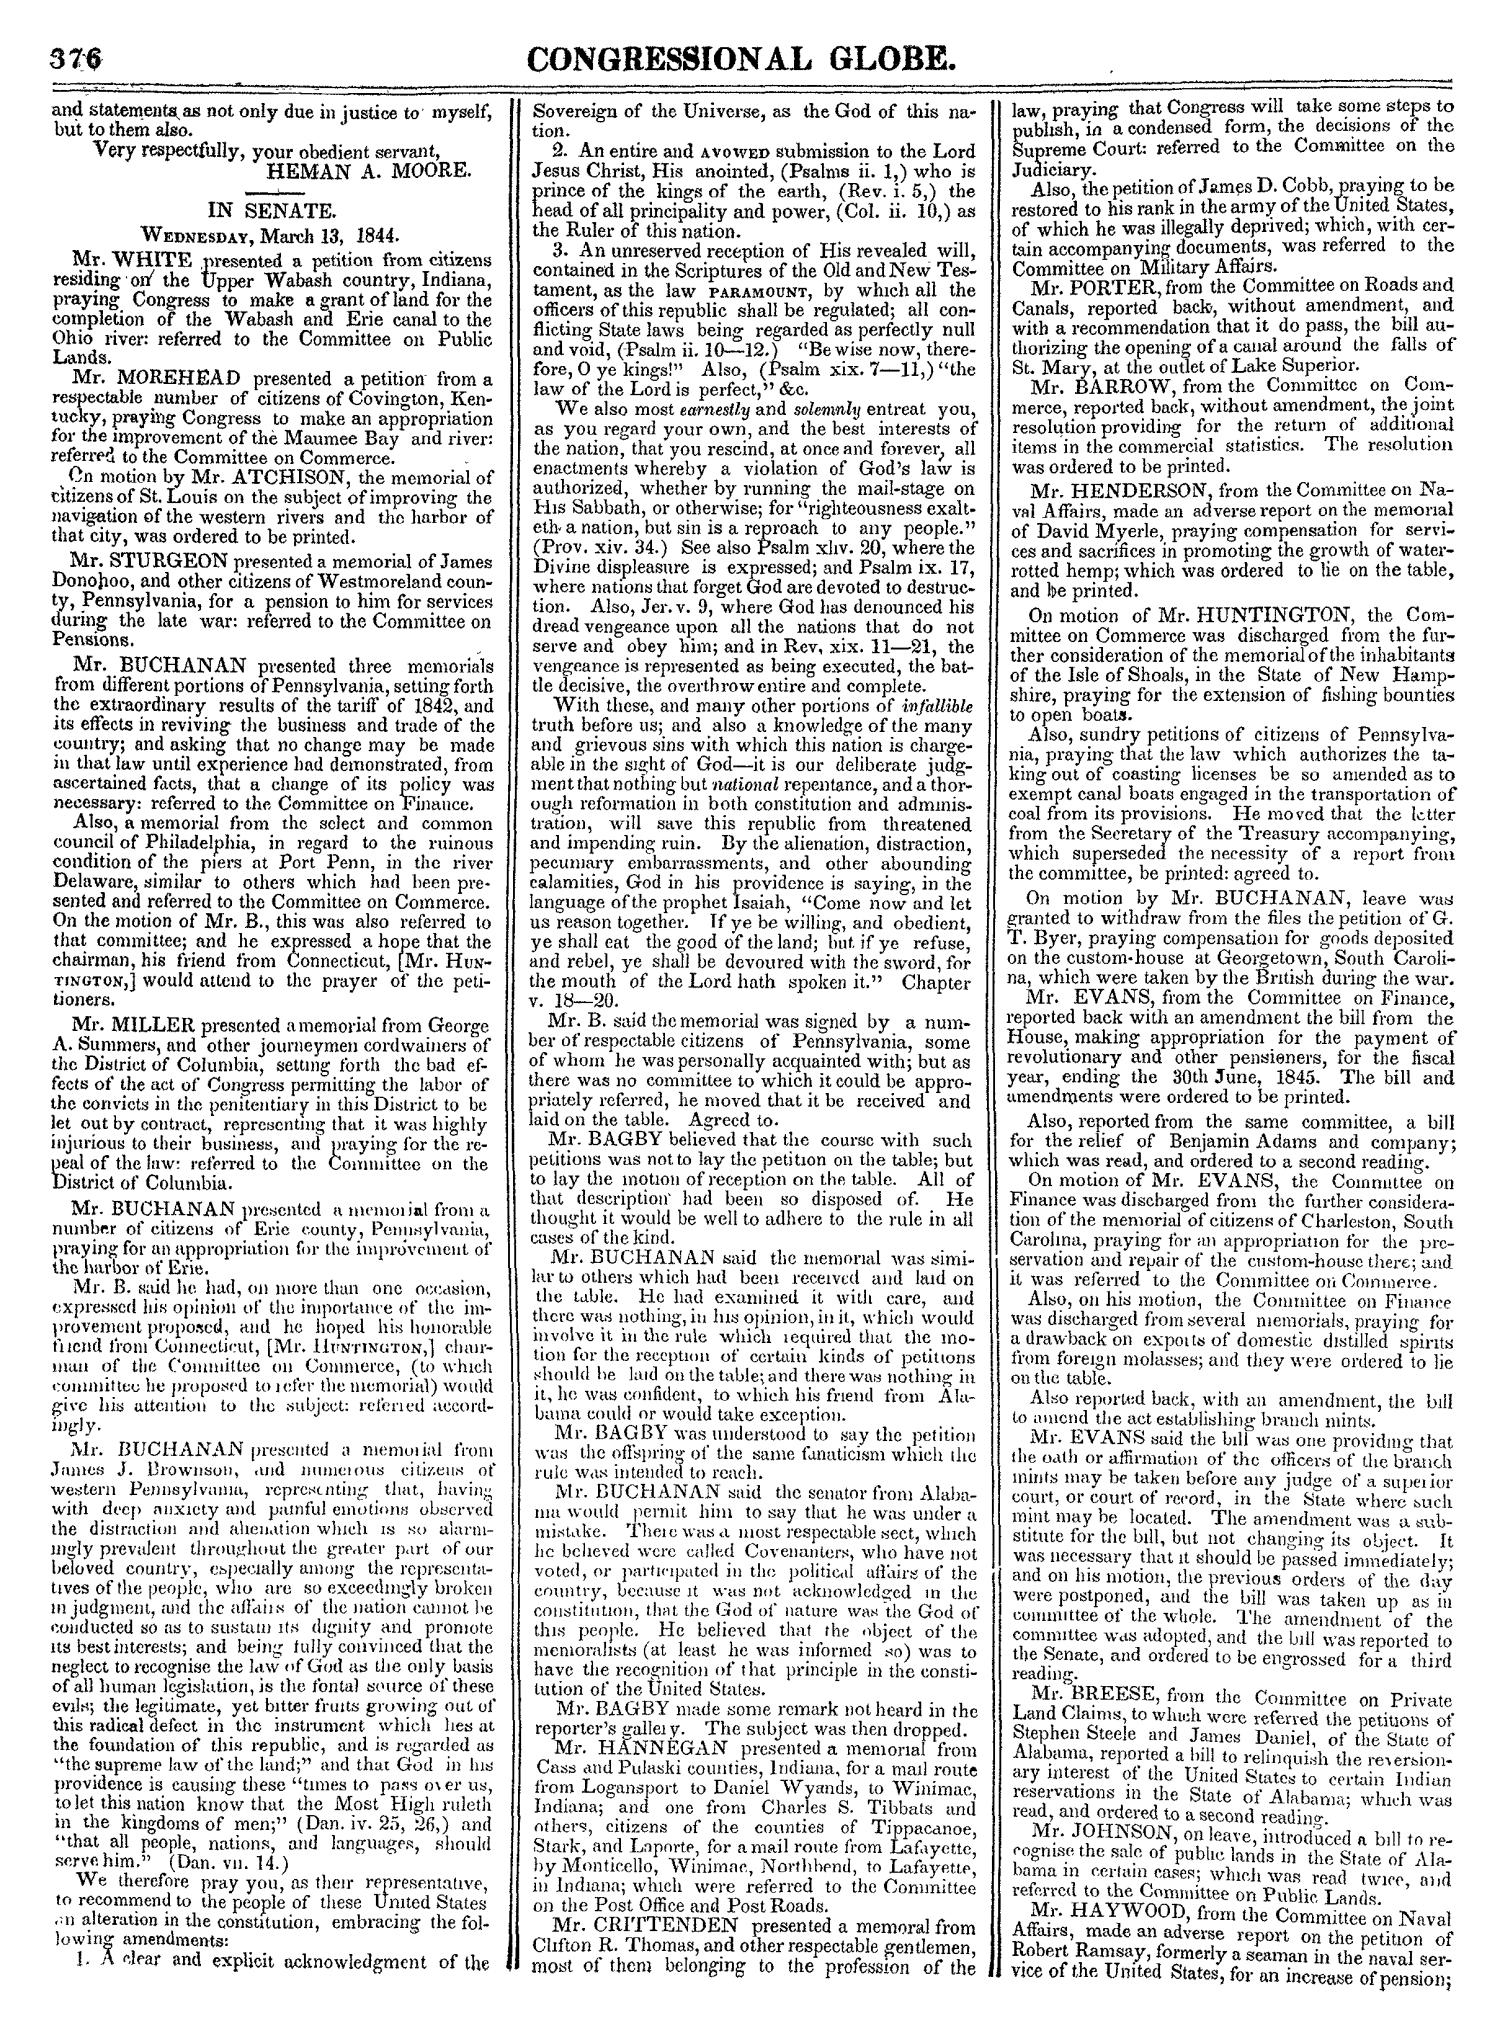 The Congressional Globe, Volume 13, Part 1: Twenty-Eighth Congress, First Session
                                                
                                                    376
                                                